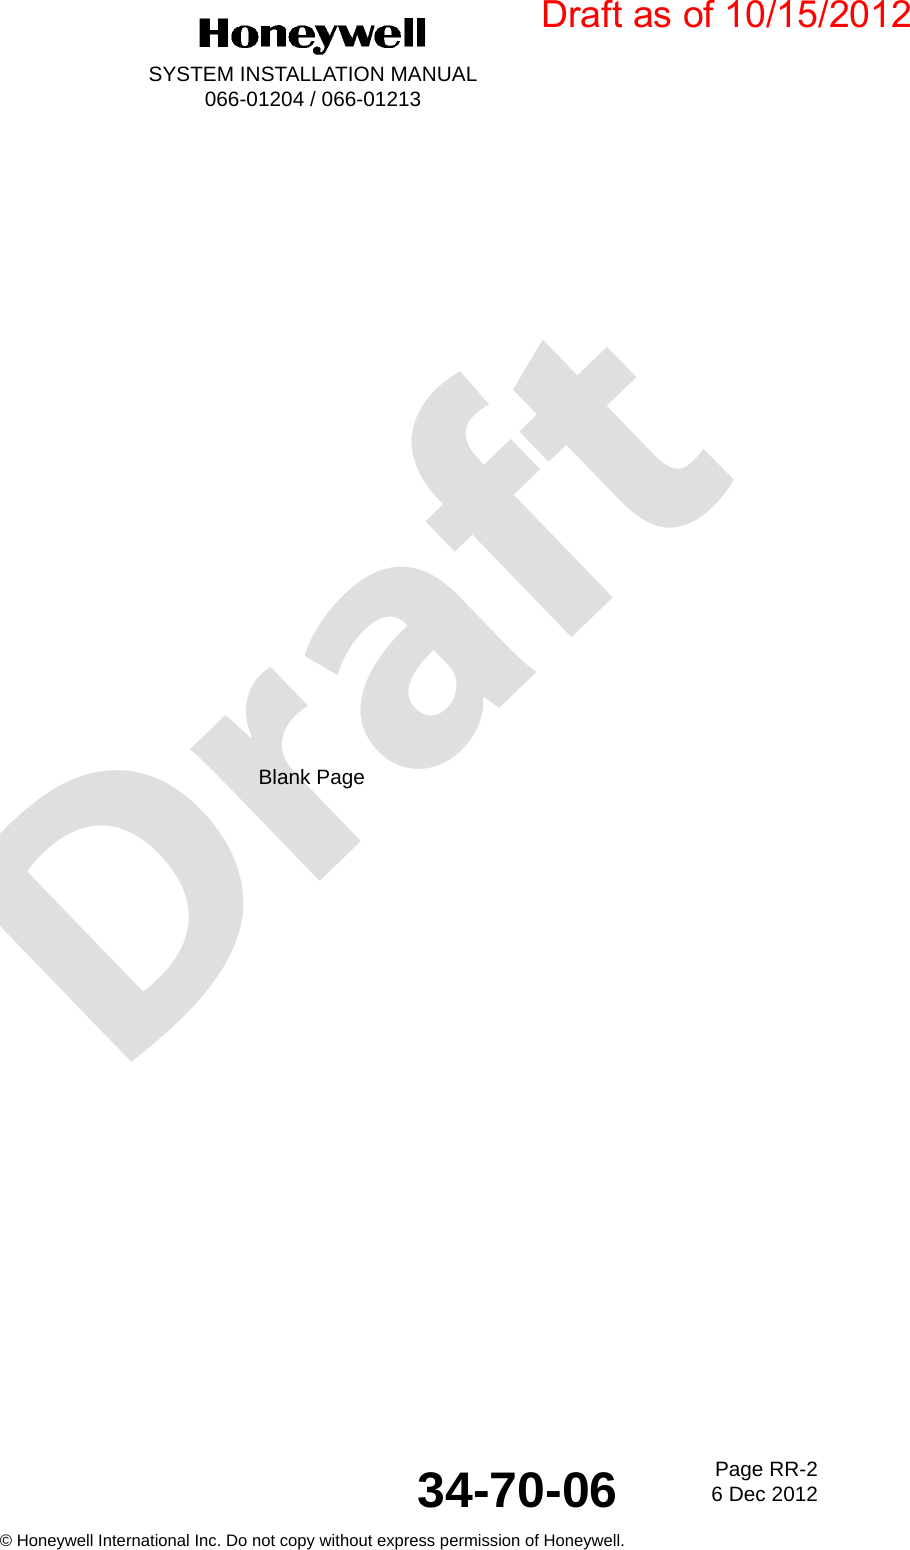 DraftPage RR-26 Dec 201234-70-06SYSTEM INSTALLATION MANUAL066-01204 / 066-01213© Honeywell International Inc. Do not copy without express permission of Honeywell.Blank PageDraft as of 10/15/2012